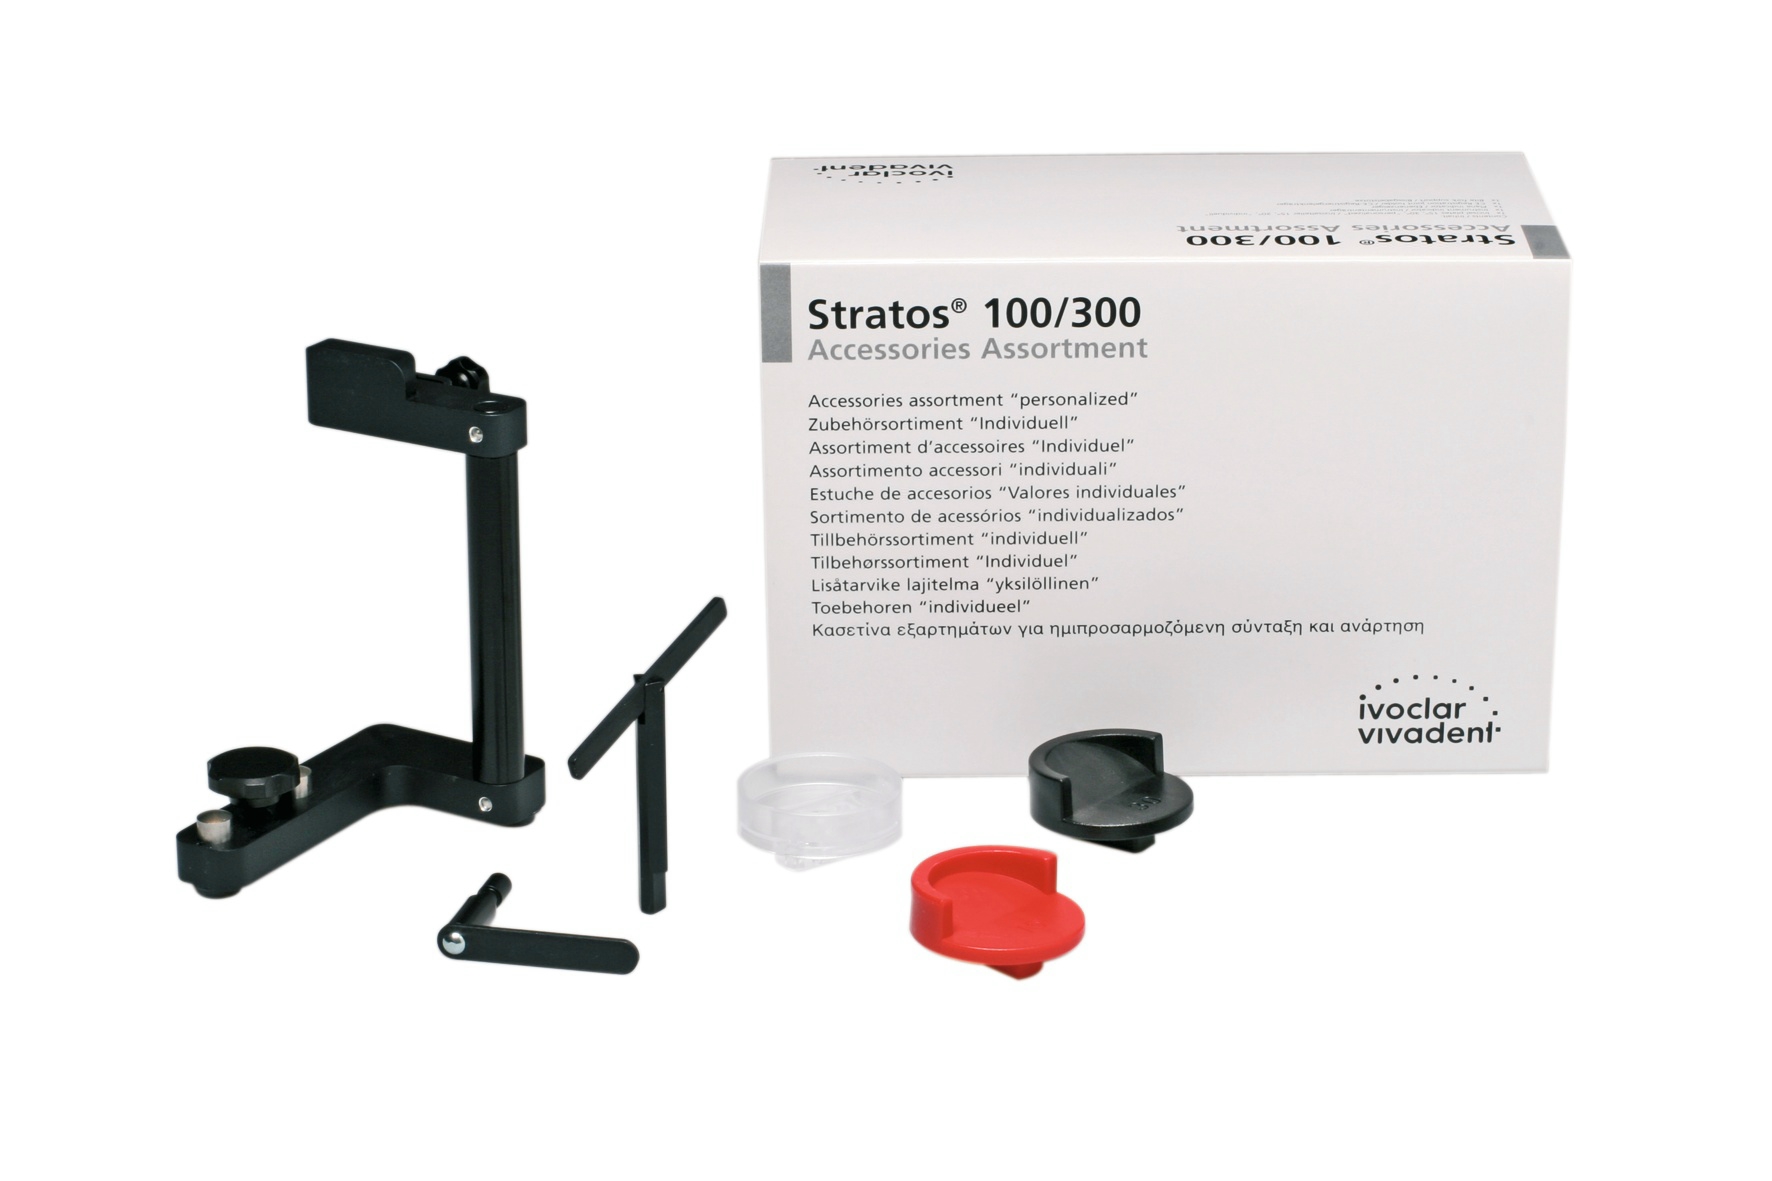 Accessories Assortment for Stratos 100/300